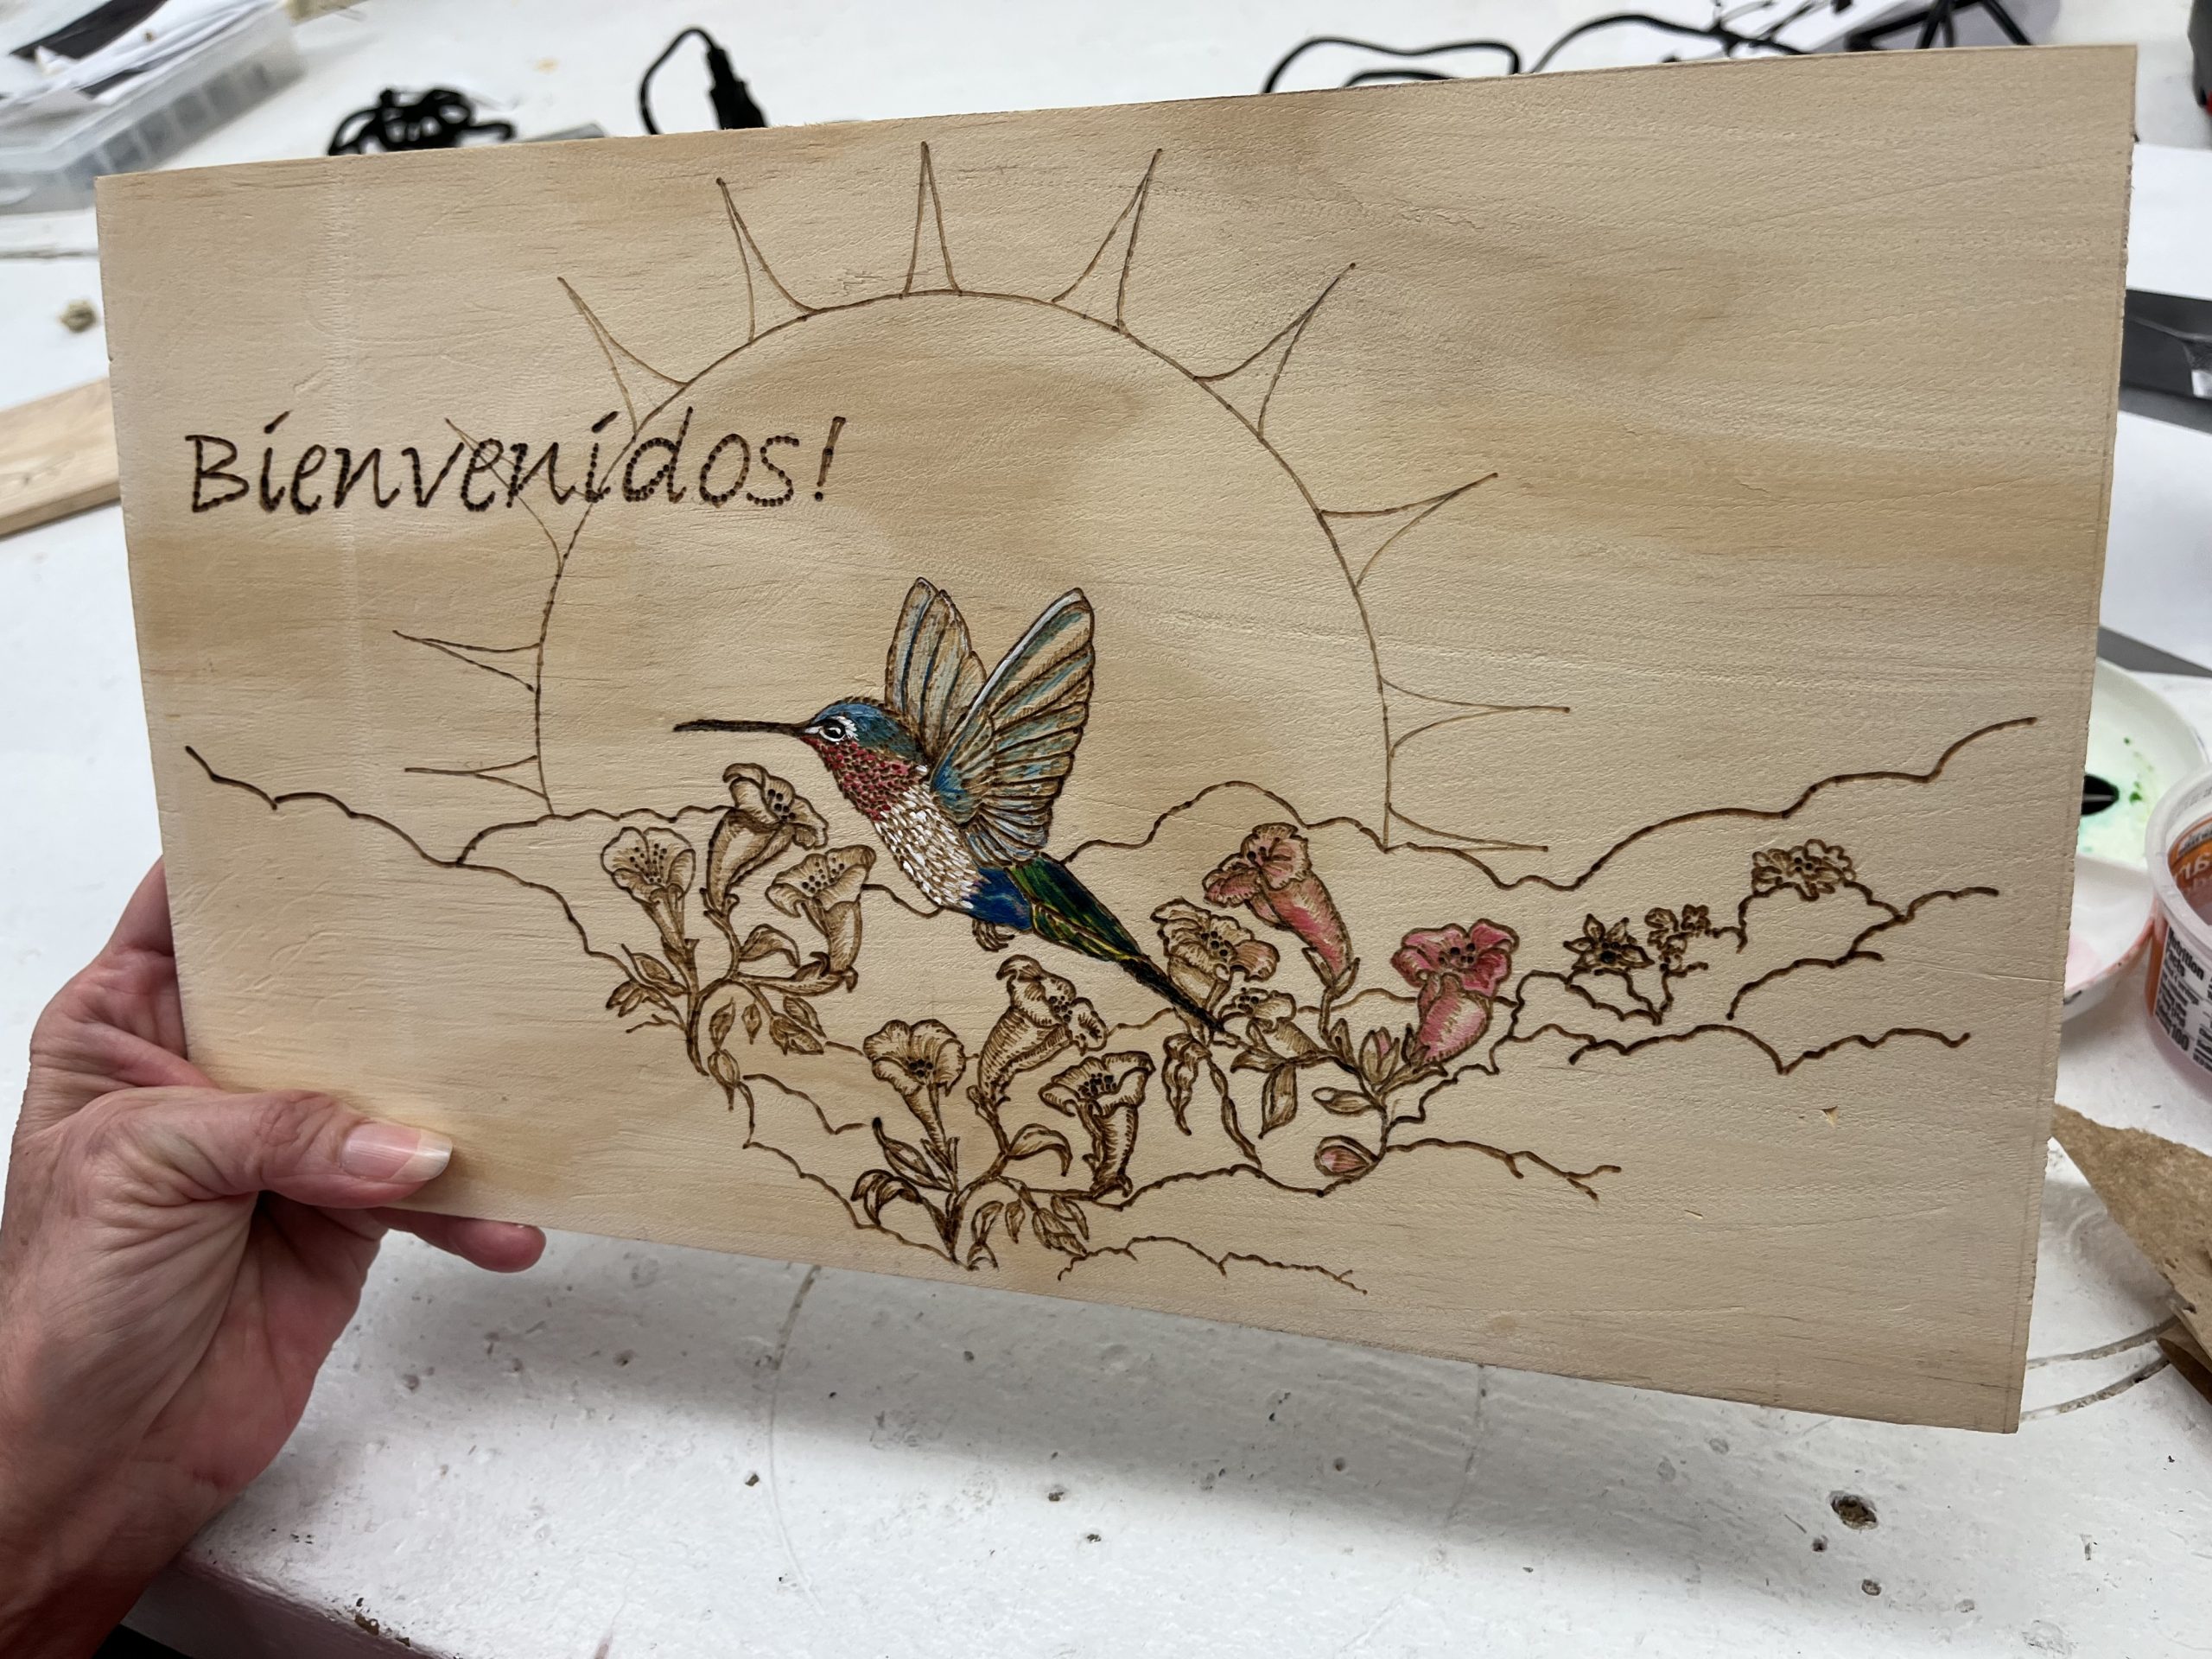 A beautiful wooden sign of a hummingbird flying over flowers created by one of the inmates in the Woodworking program